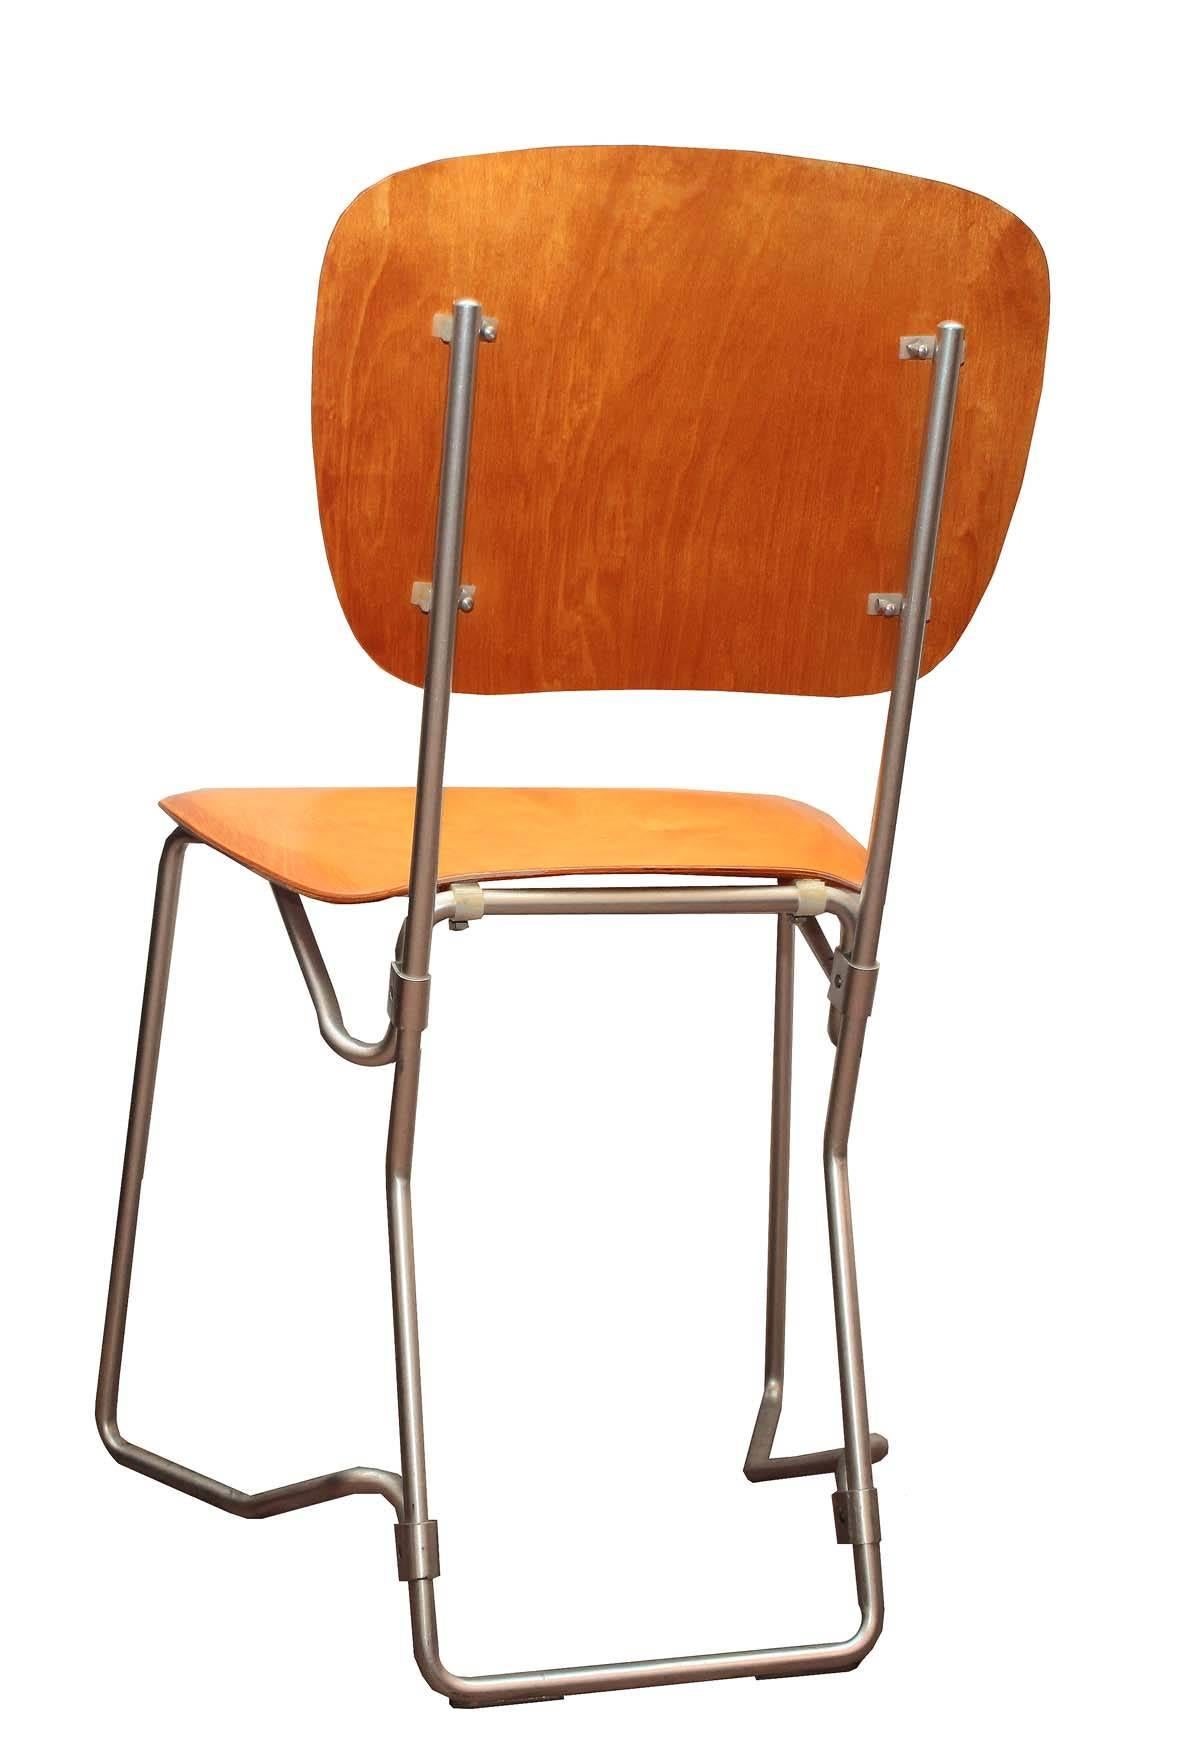 Set of original Armin Wirth folding chairs. Great condition aluminium frame with wood seats. All fold with ease and stack as designed. A sexy design that are both fantastic to look at and comfortable to sit on. Seat height: 17